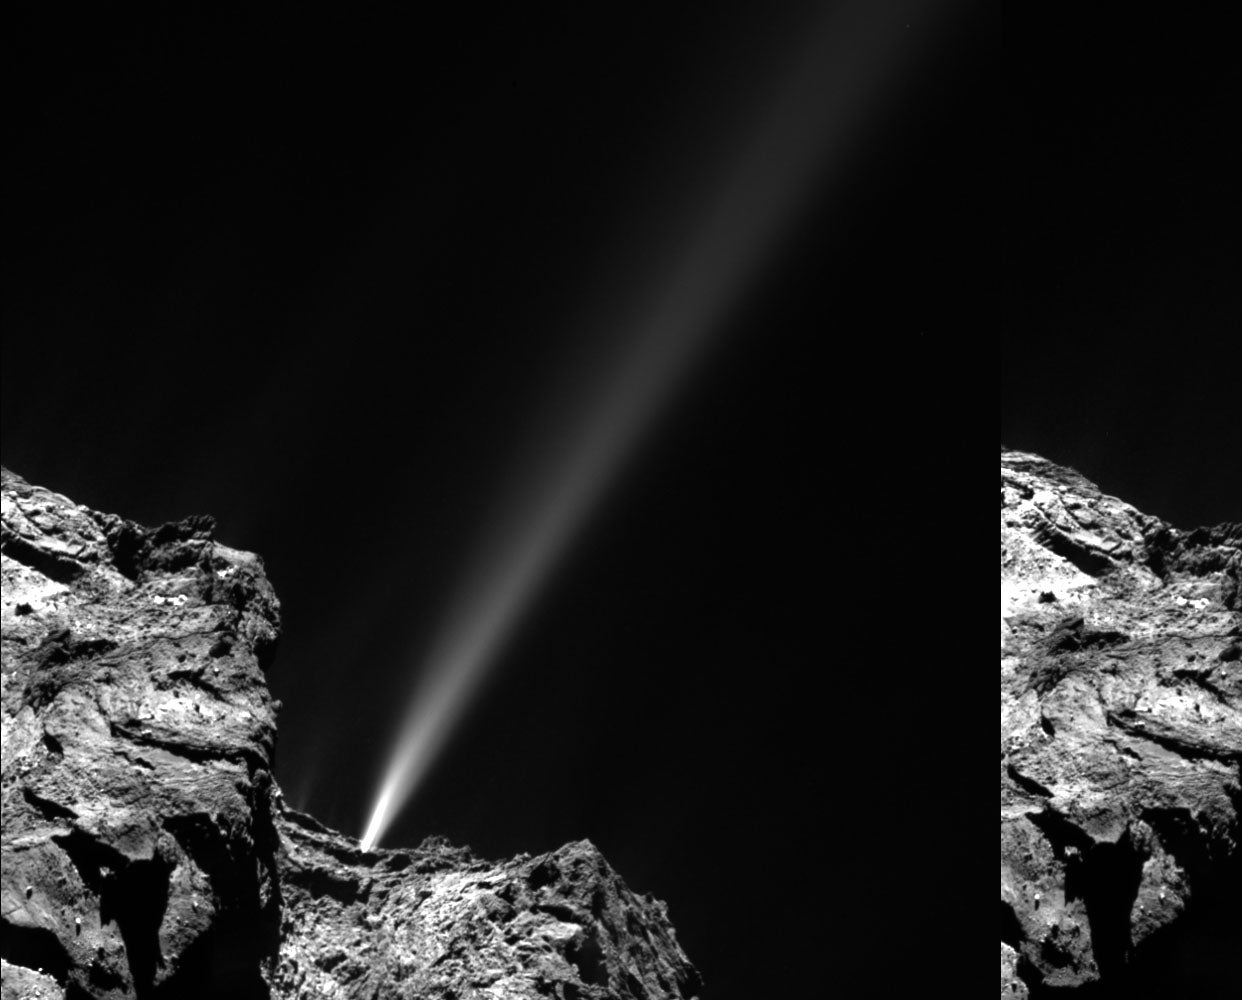 The comet's outburst in action, captured by the Rosetta space probe